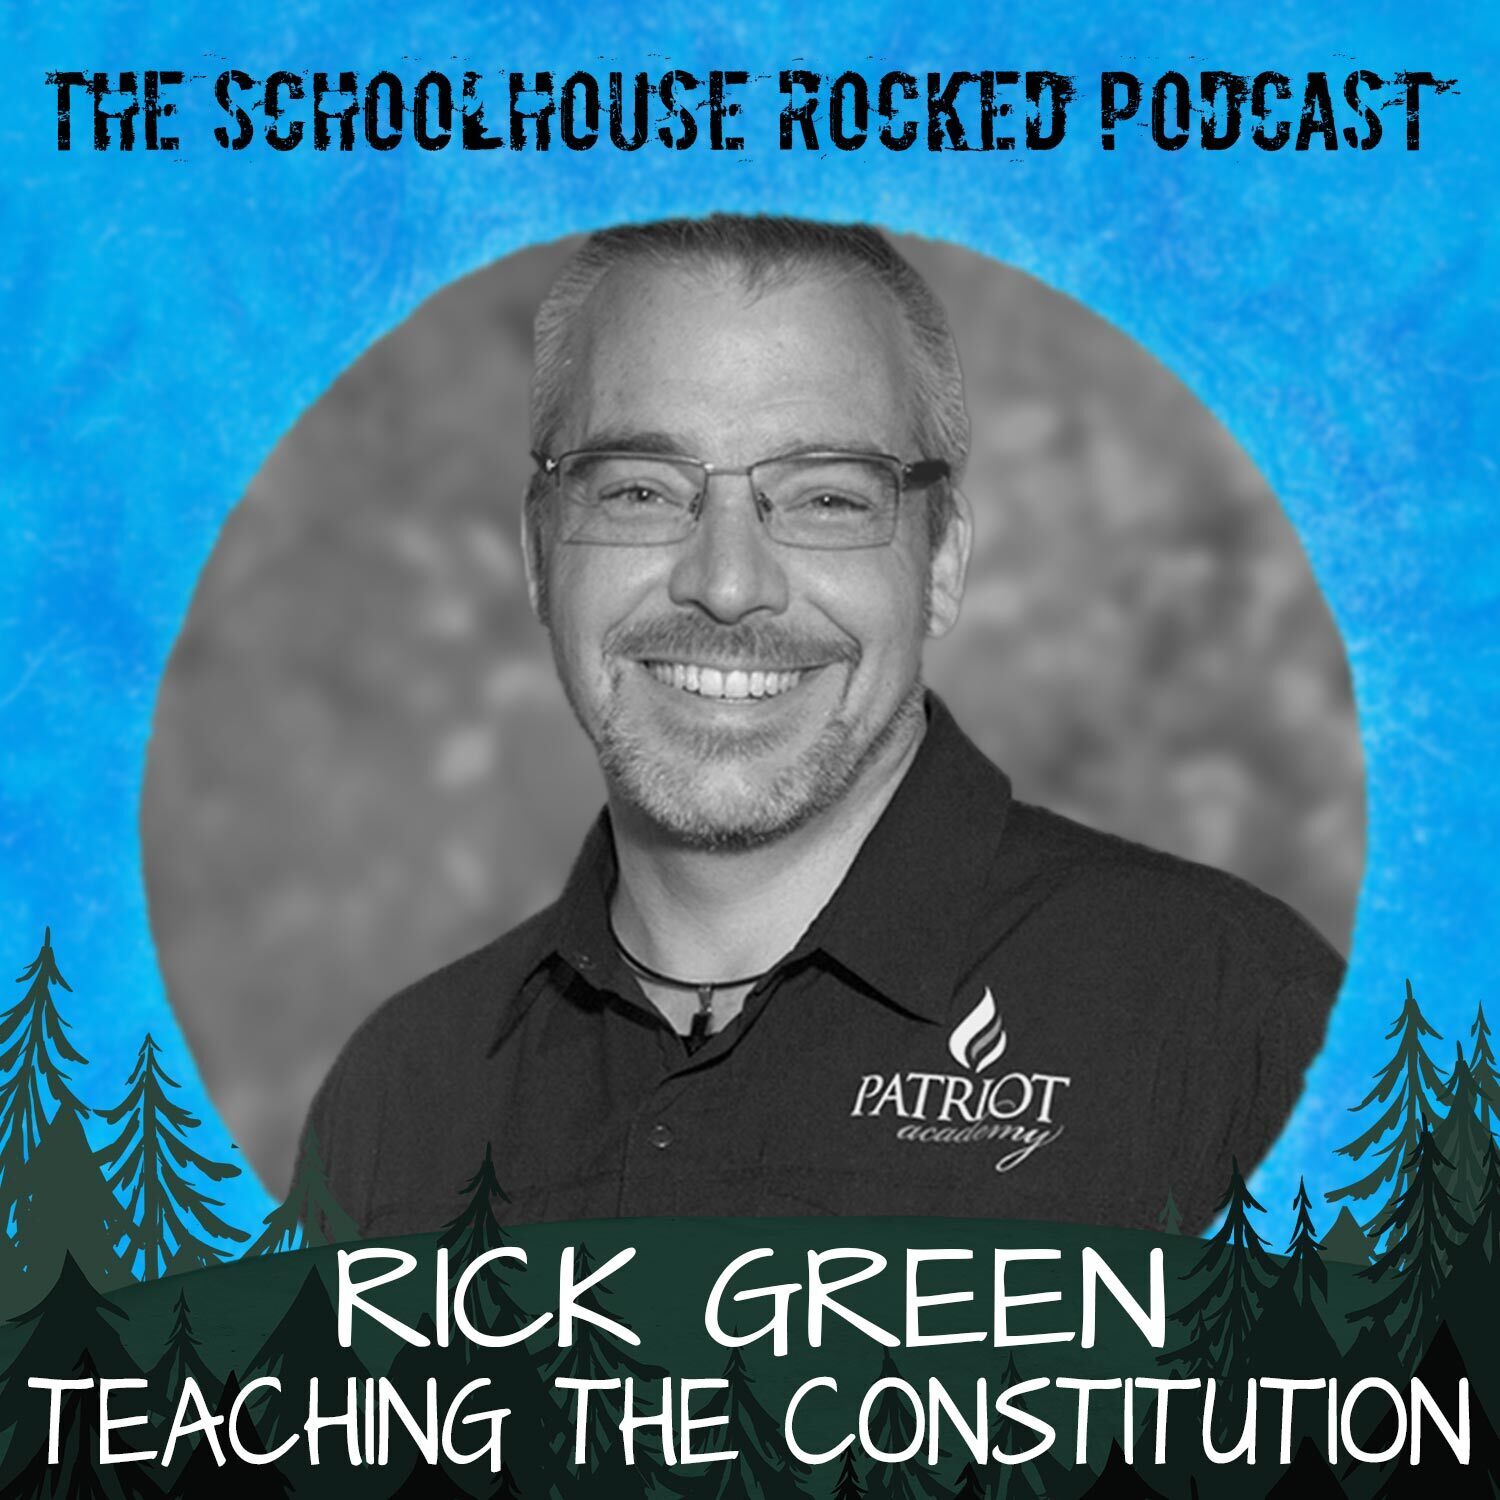 Rick Green of Wallbuilders - Teaching the Constitution to our Children